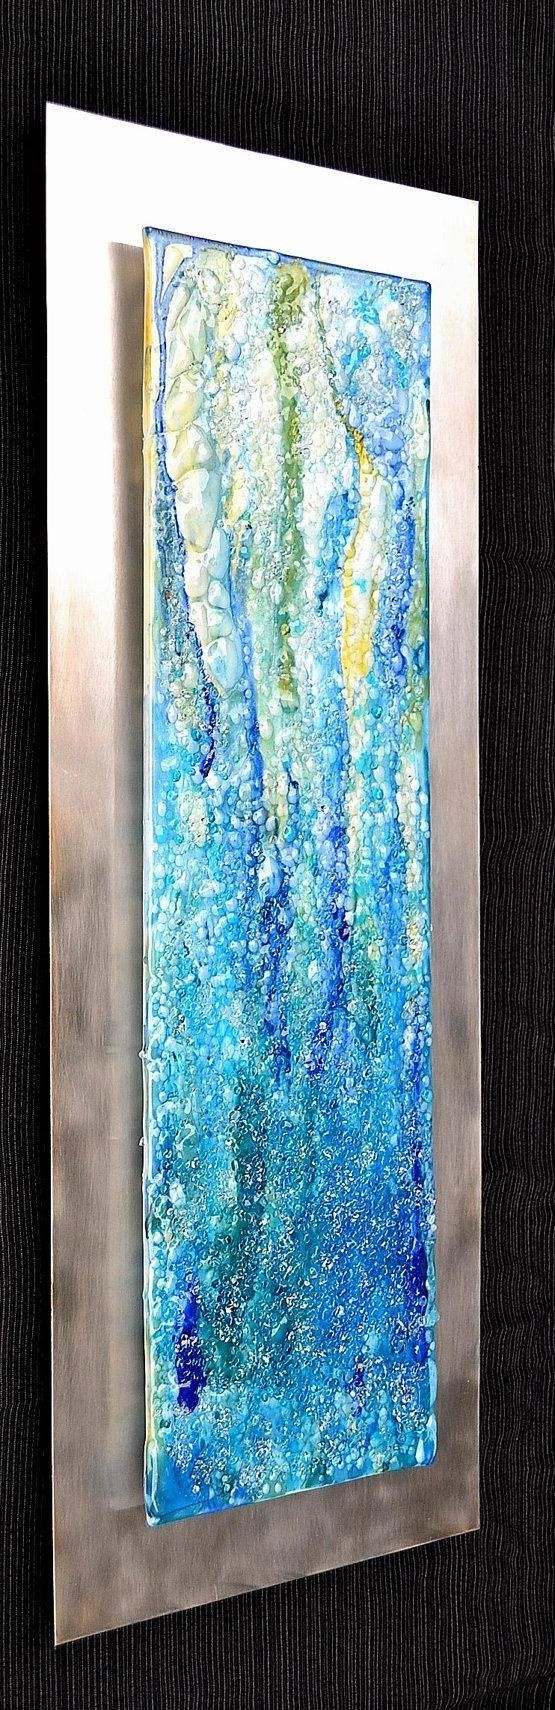 277 Best Ceramic And Fused Glass Wall Art Images On Pinterest With Regard To 2017 Glass Wall Artworks (View 3 of 15)